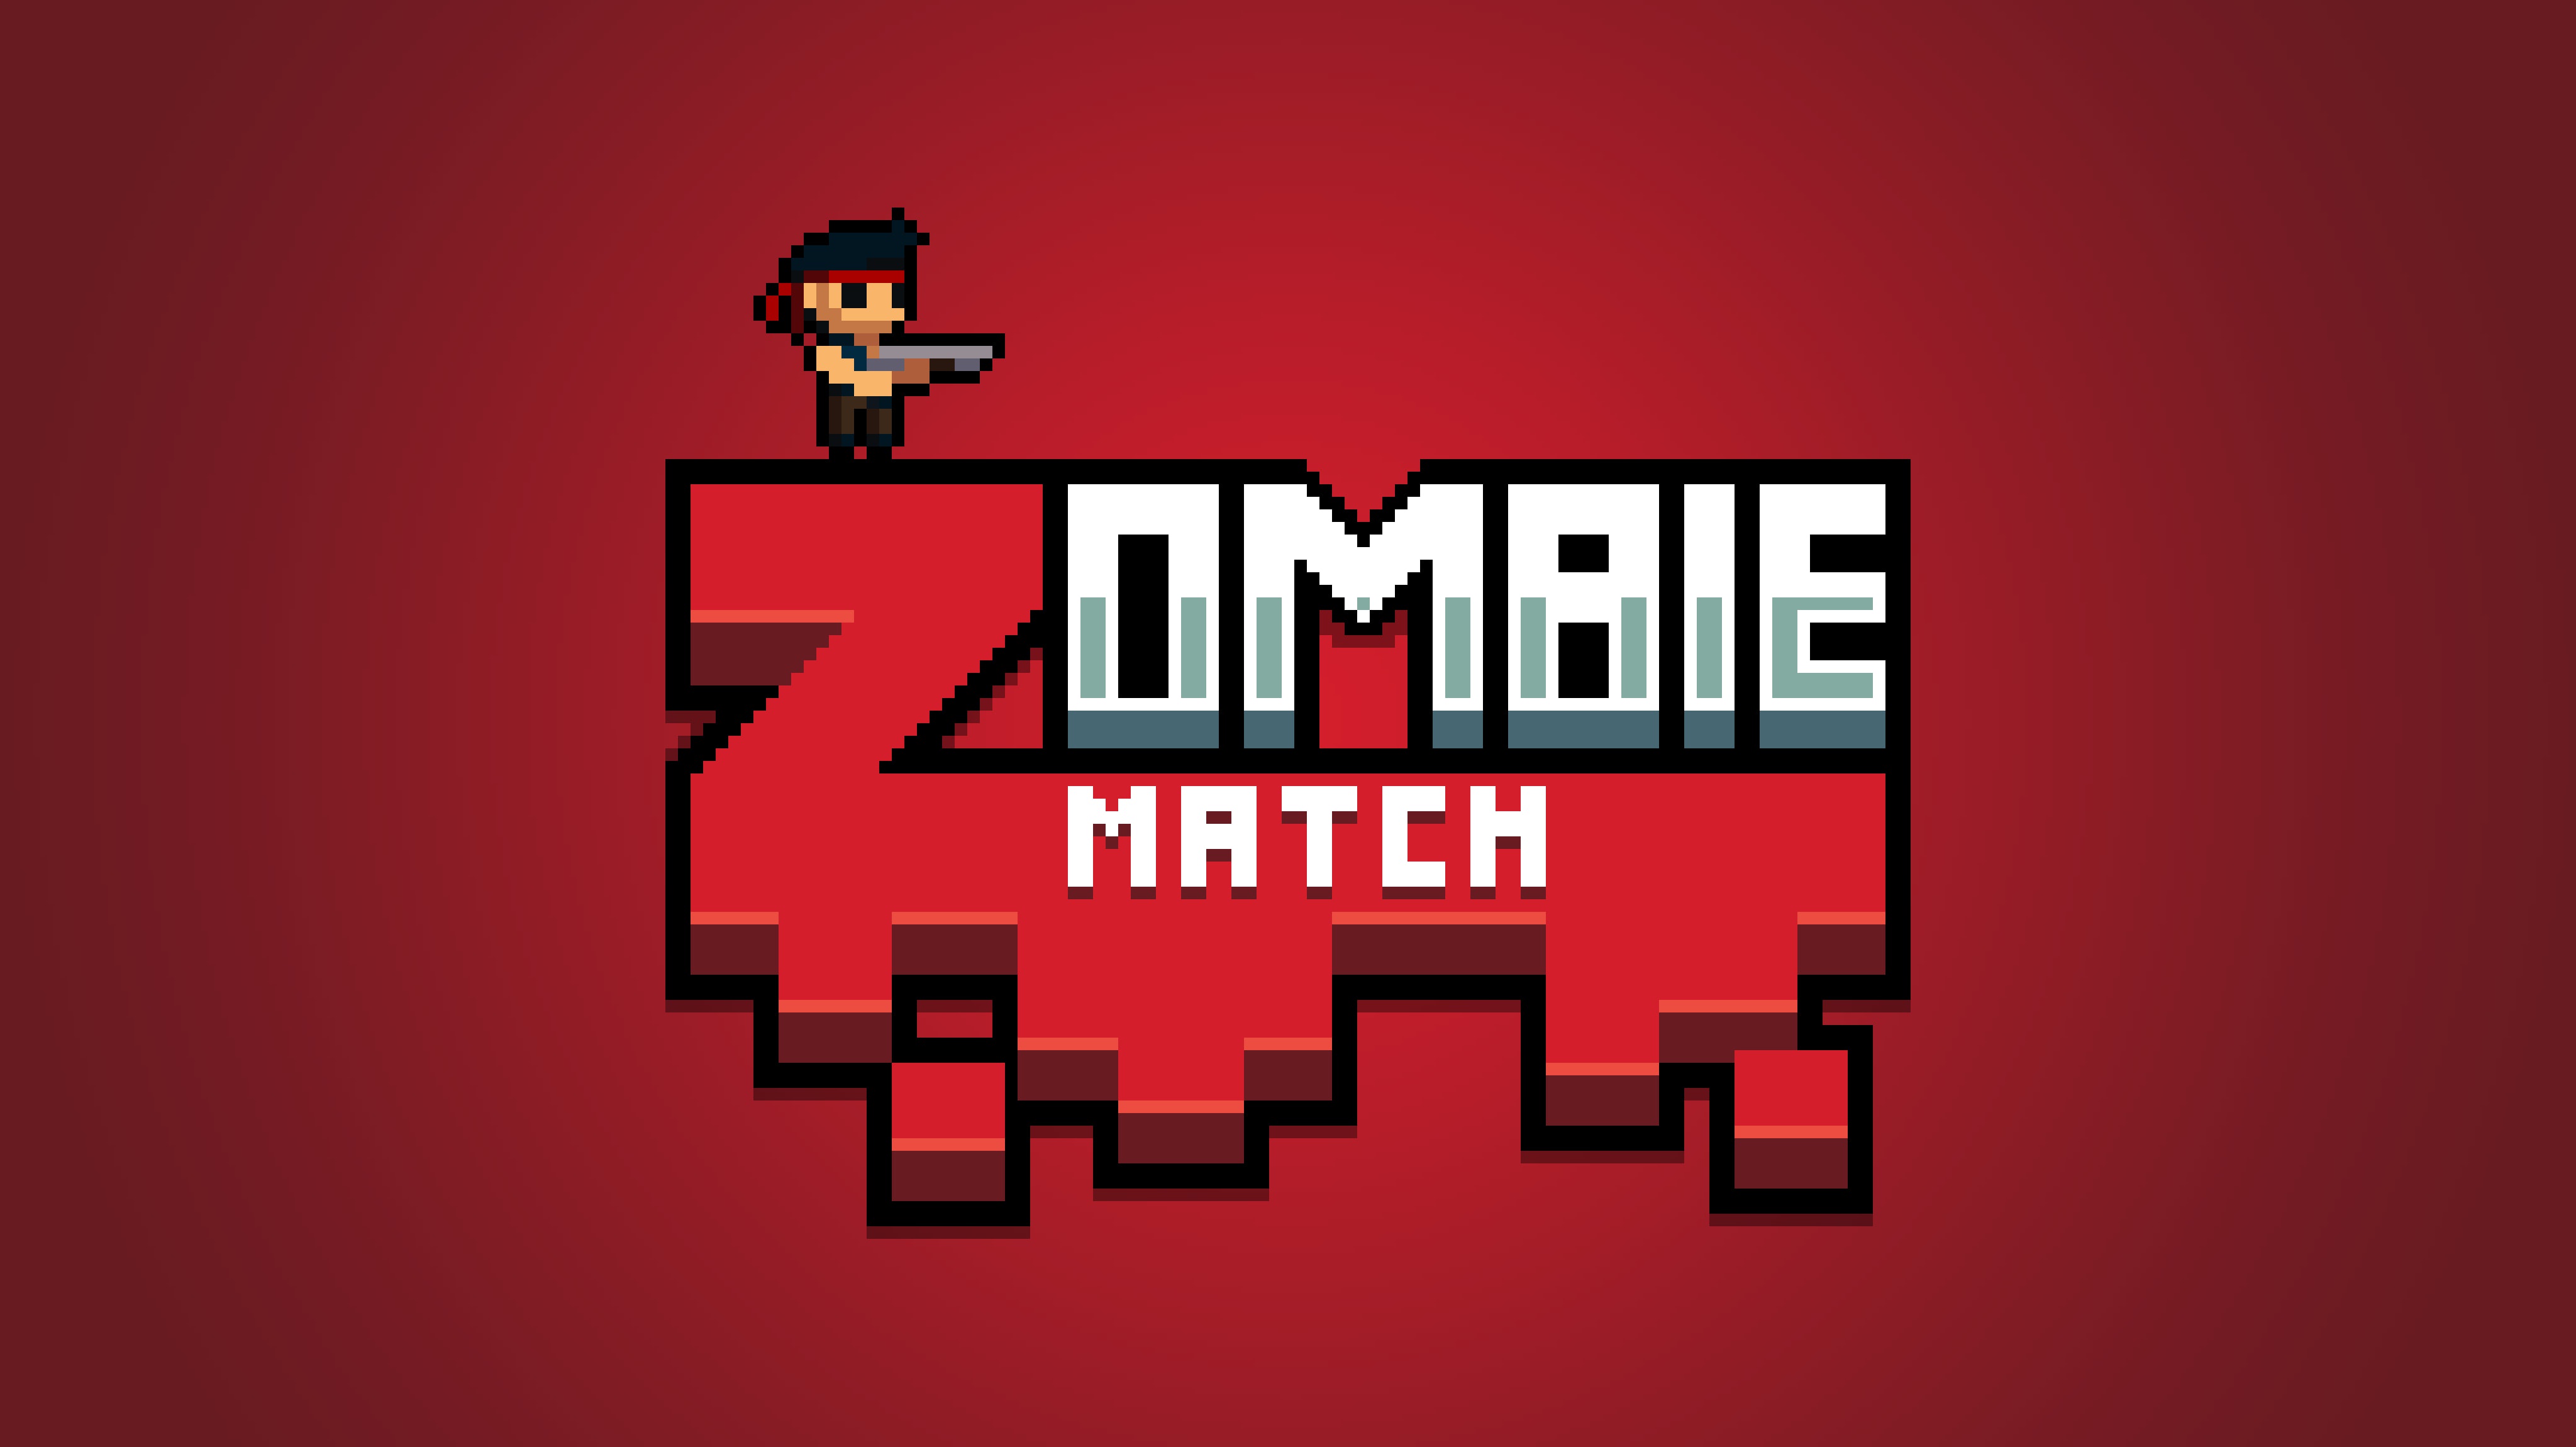 ZOMBIE WORLD ONLINE free online game on